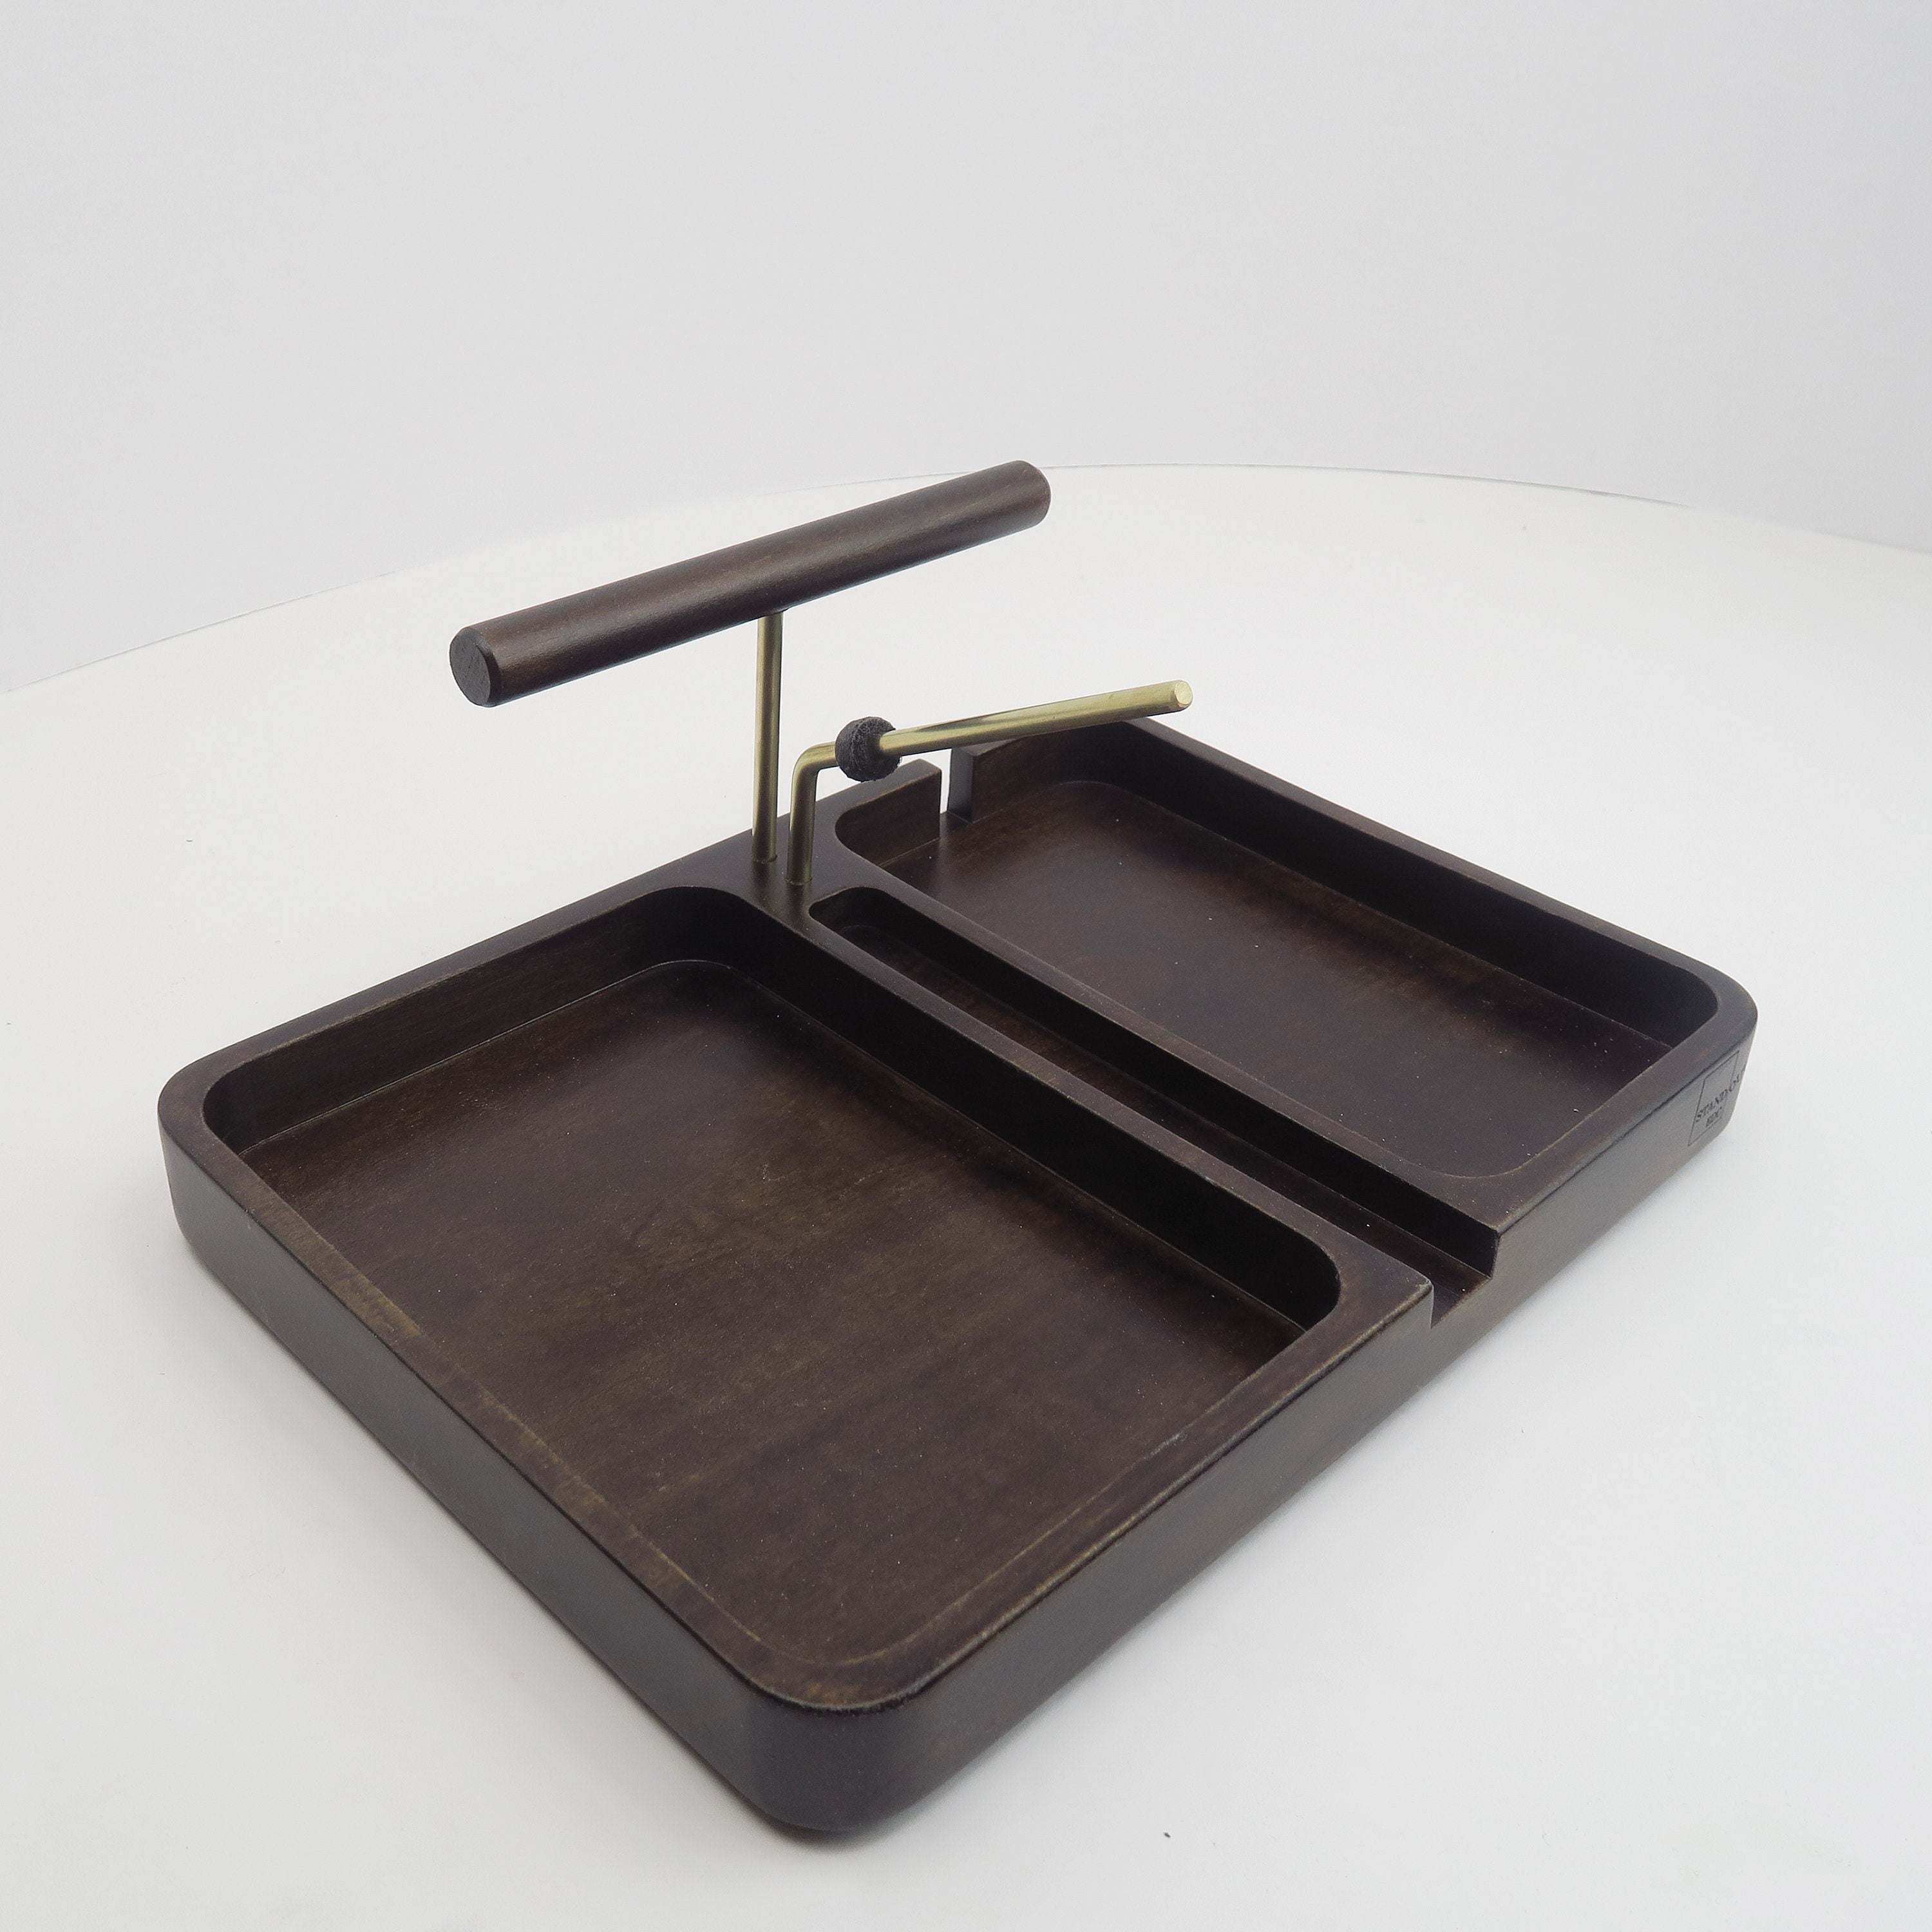 Fathers day gift, organizer with accessory bar , Station for EDC, bedside table solid brass EDC holder, EDC tray.